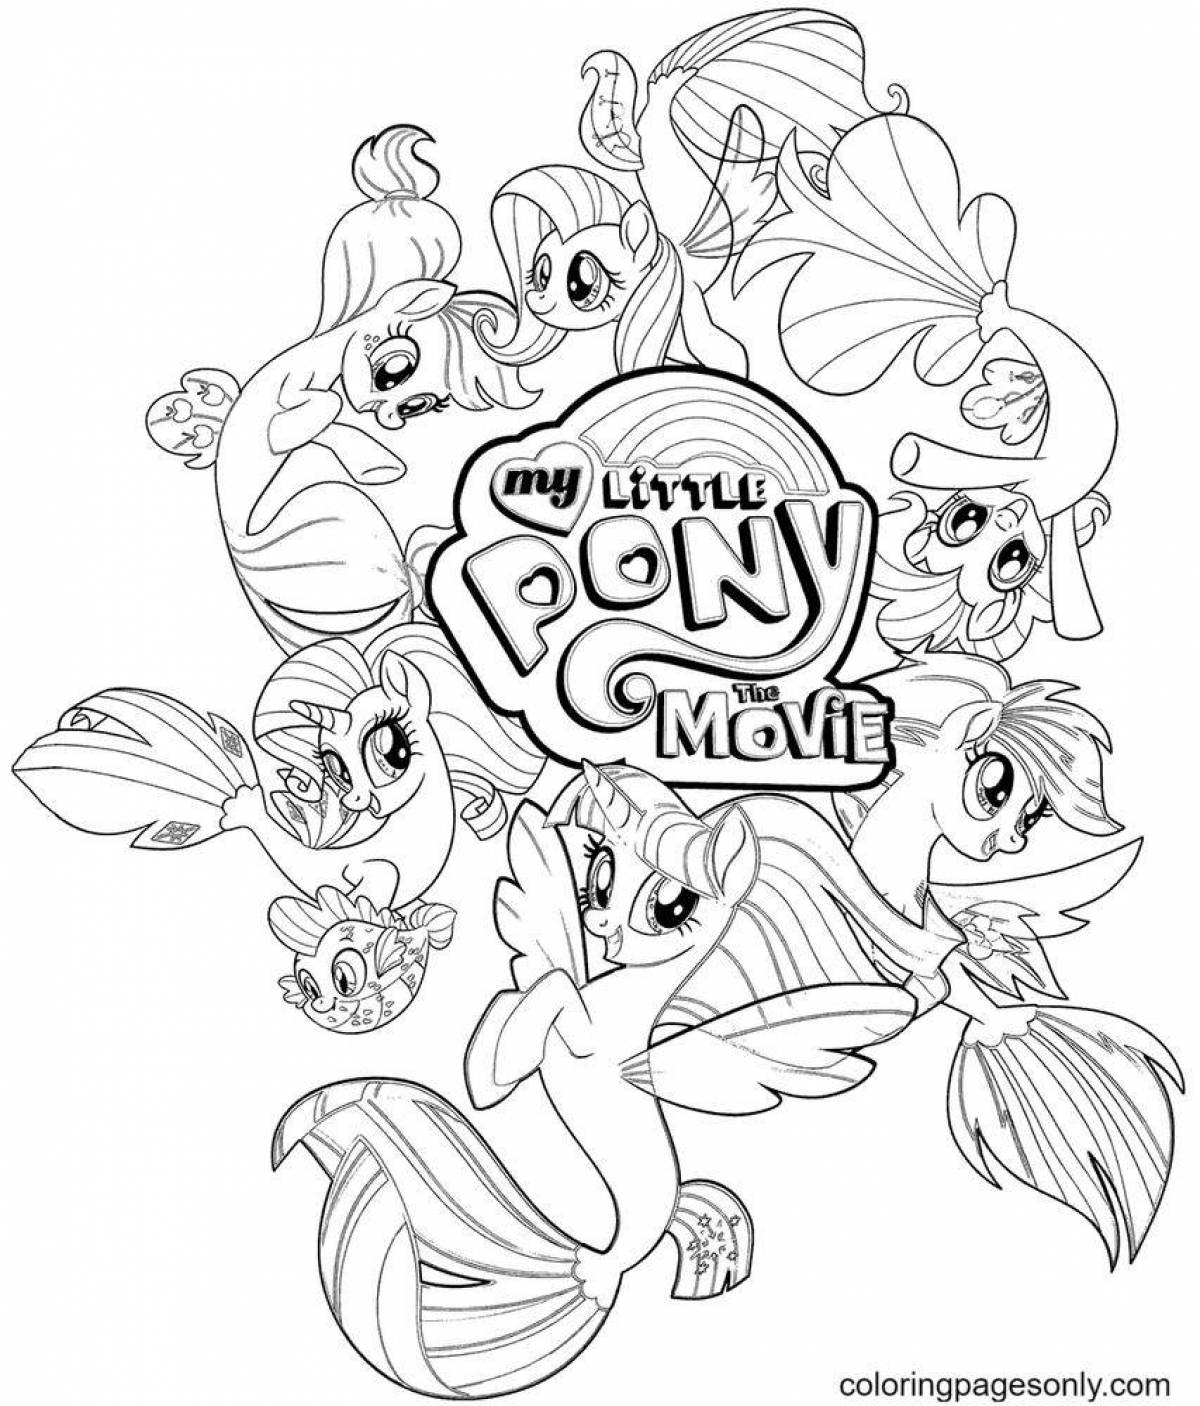 Amazing coloring pages malital pony mermaids